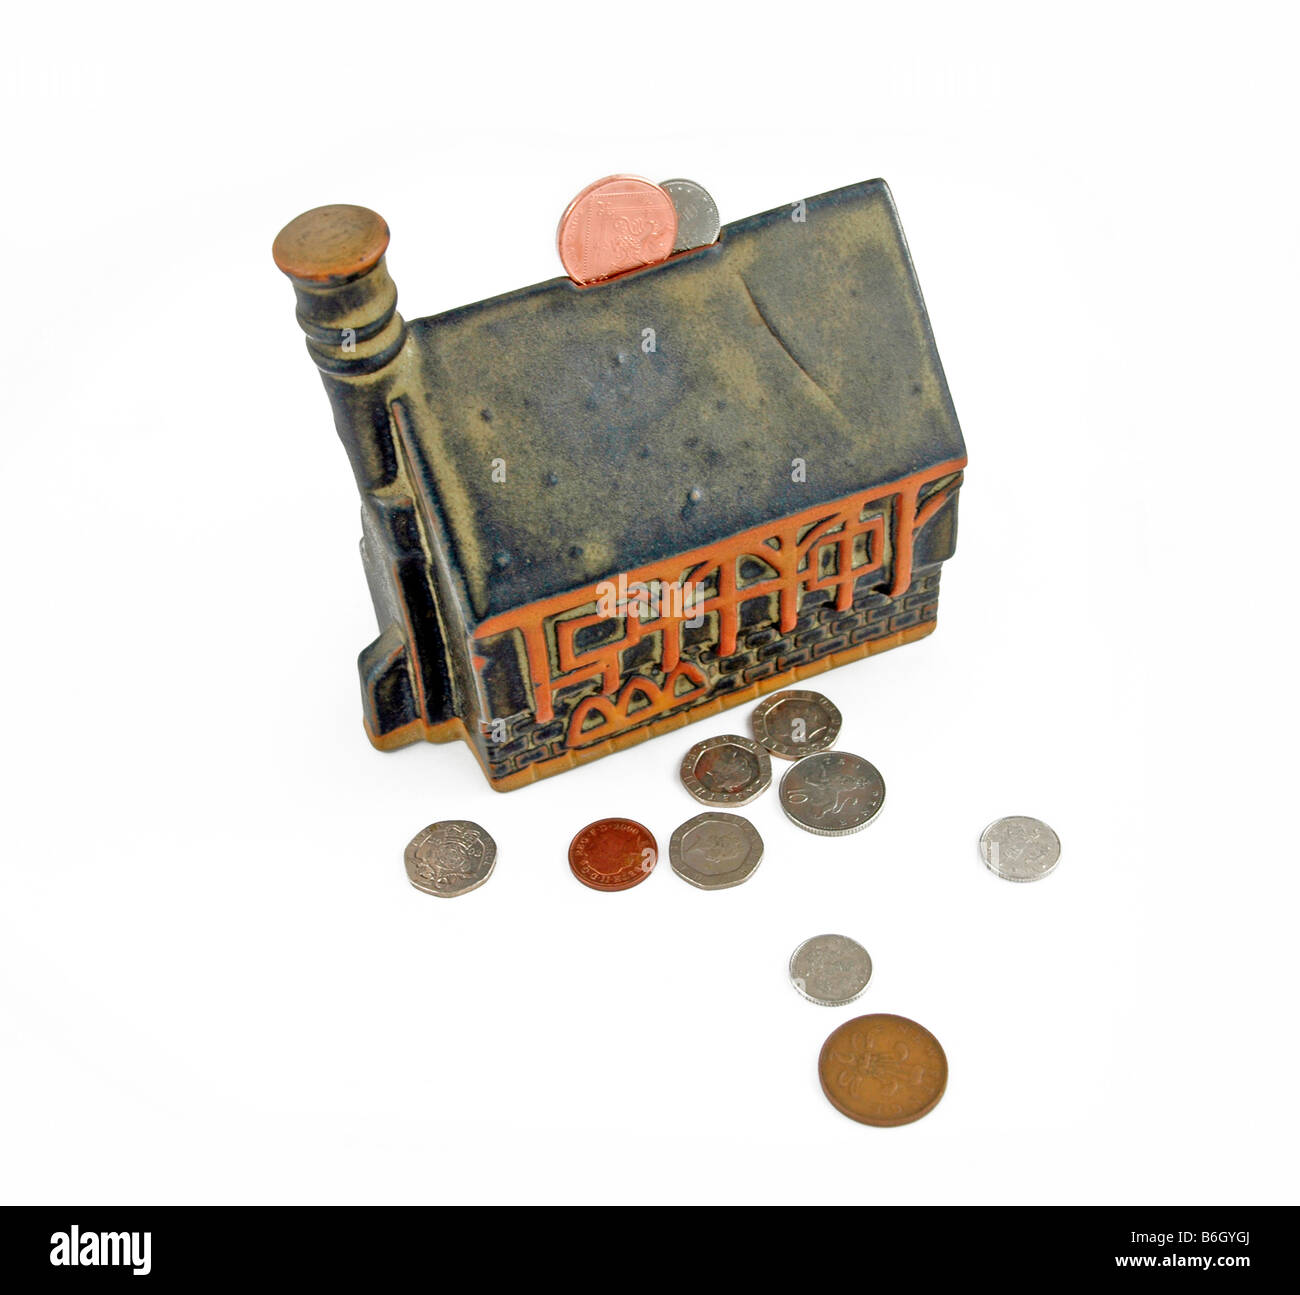 Ceramic church - piggy bank style, with coins around it and with some in the slot. Stock Photo